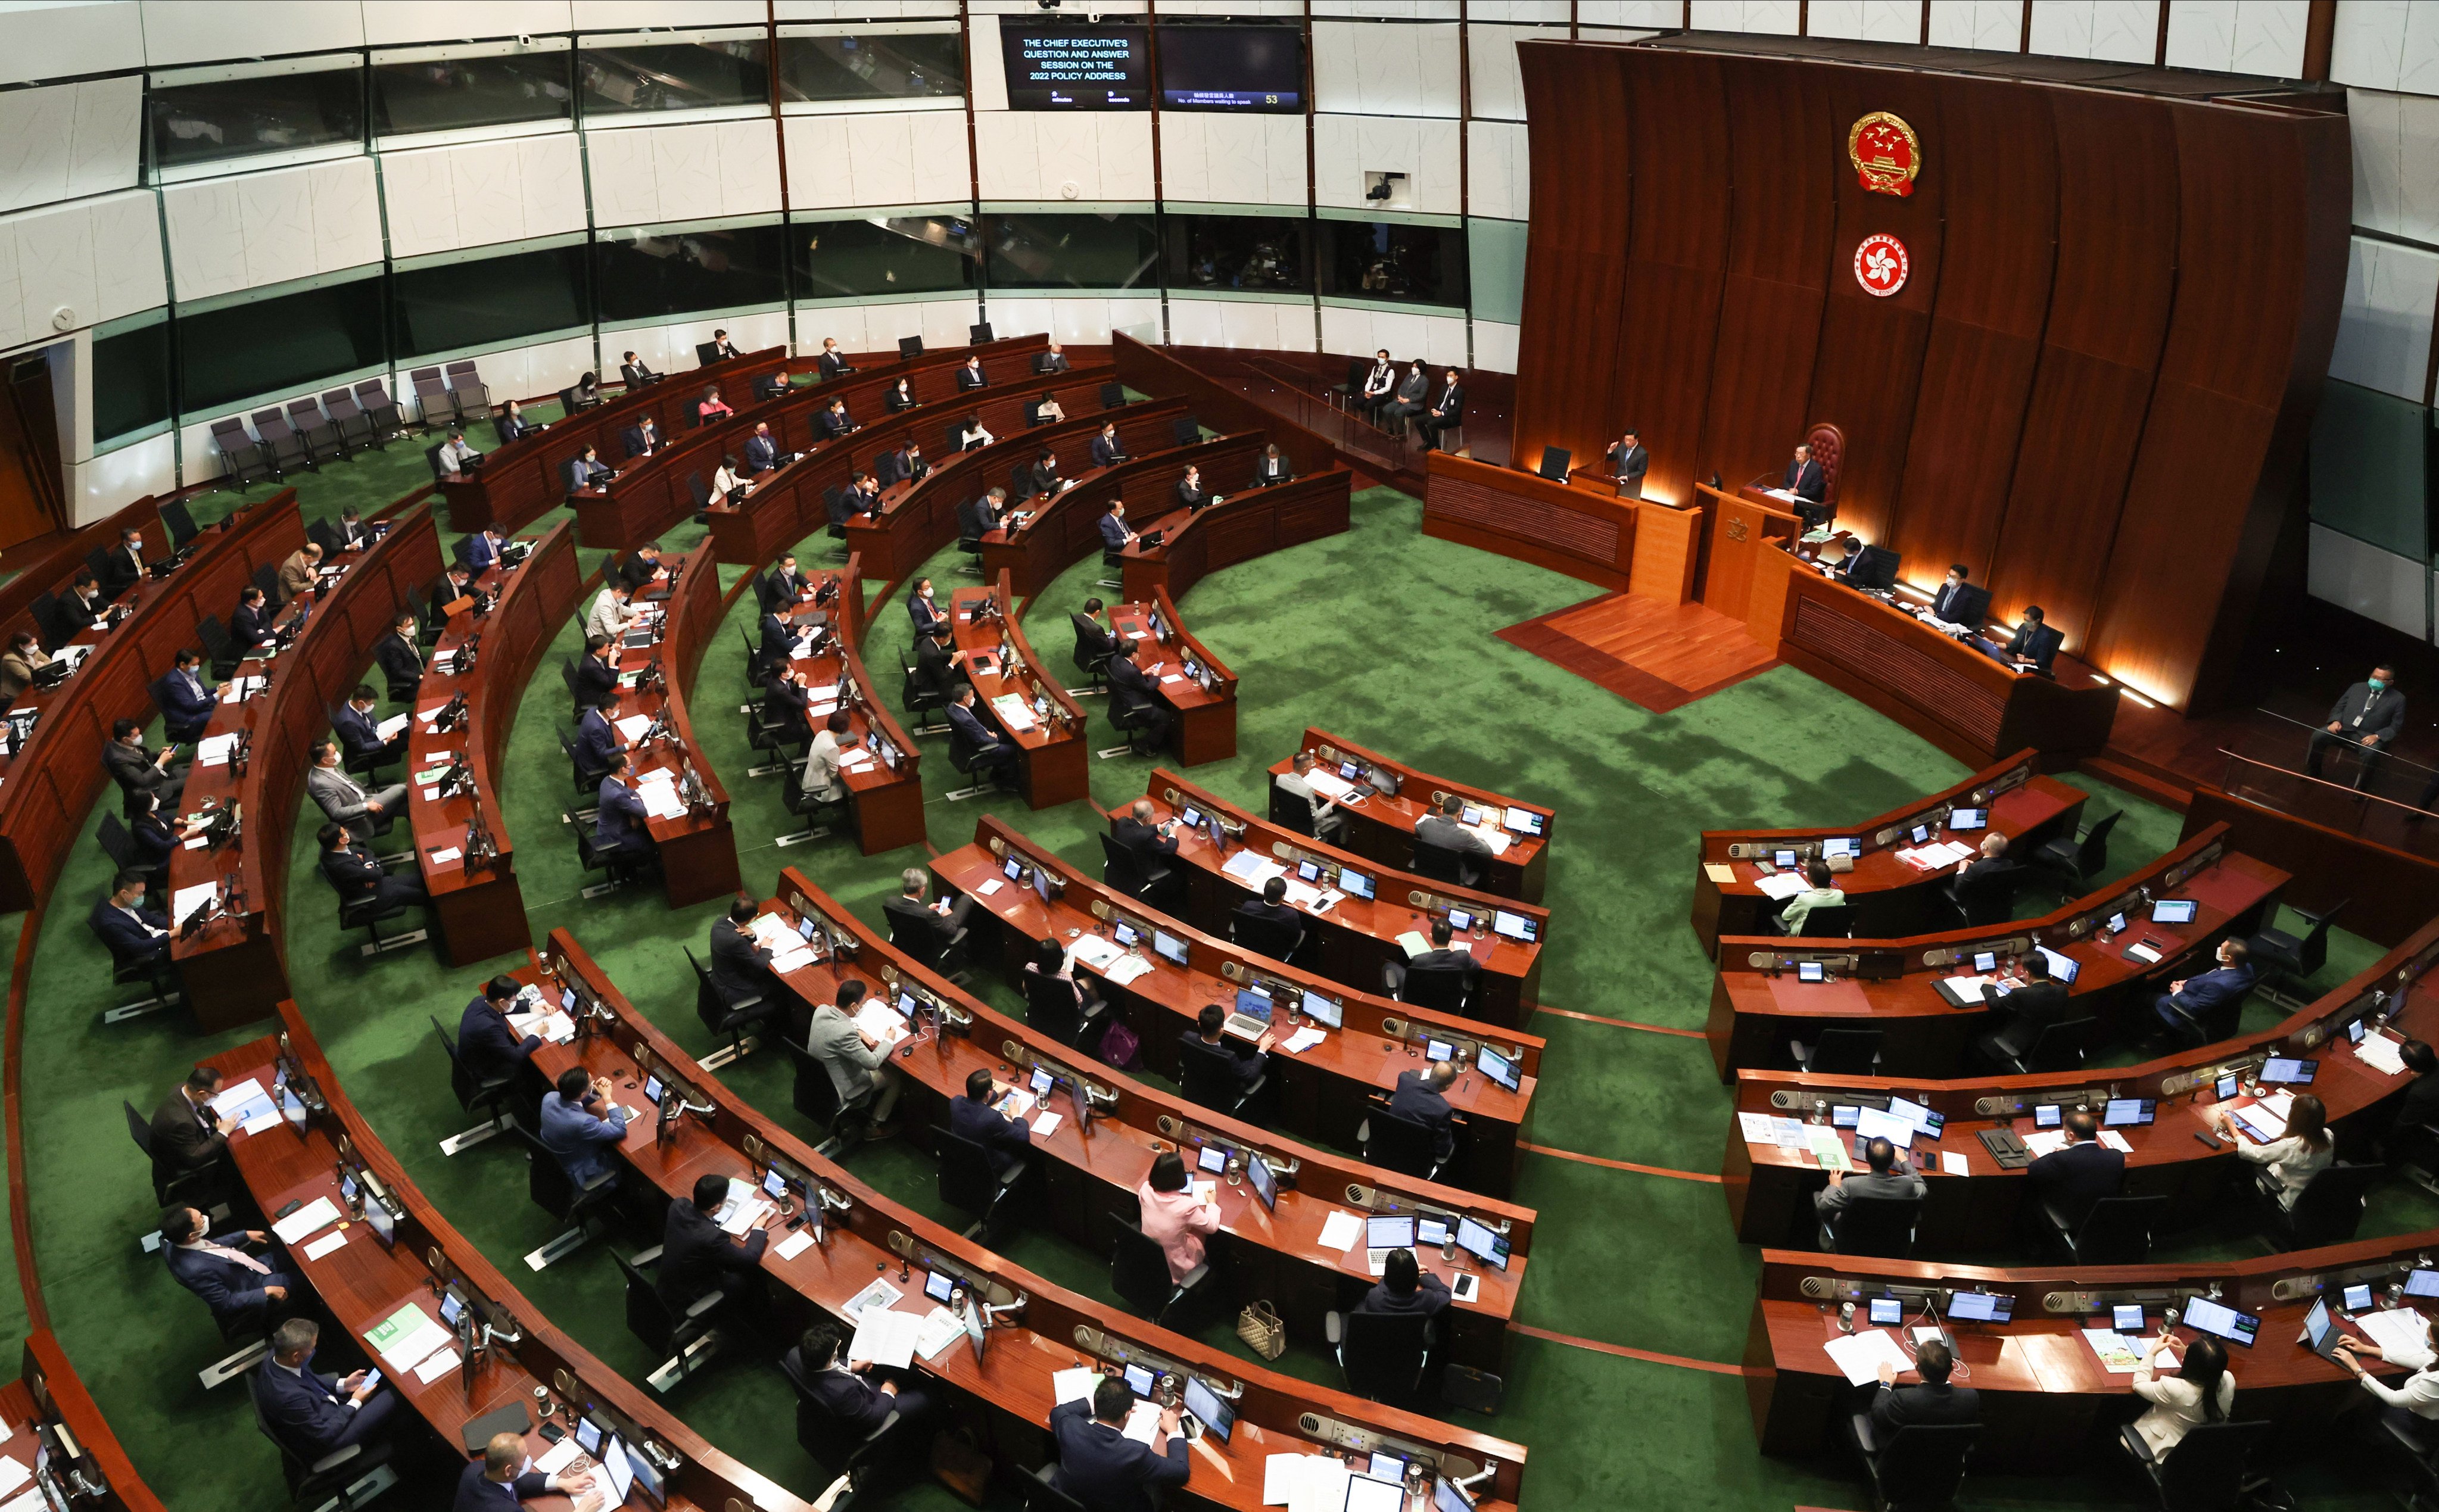 Chief executive John Lee at a Legco question-and-answer session after last year’s policy address. Photo: Yik Yeung-man